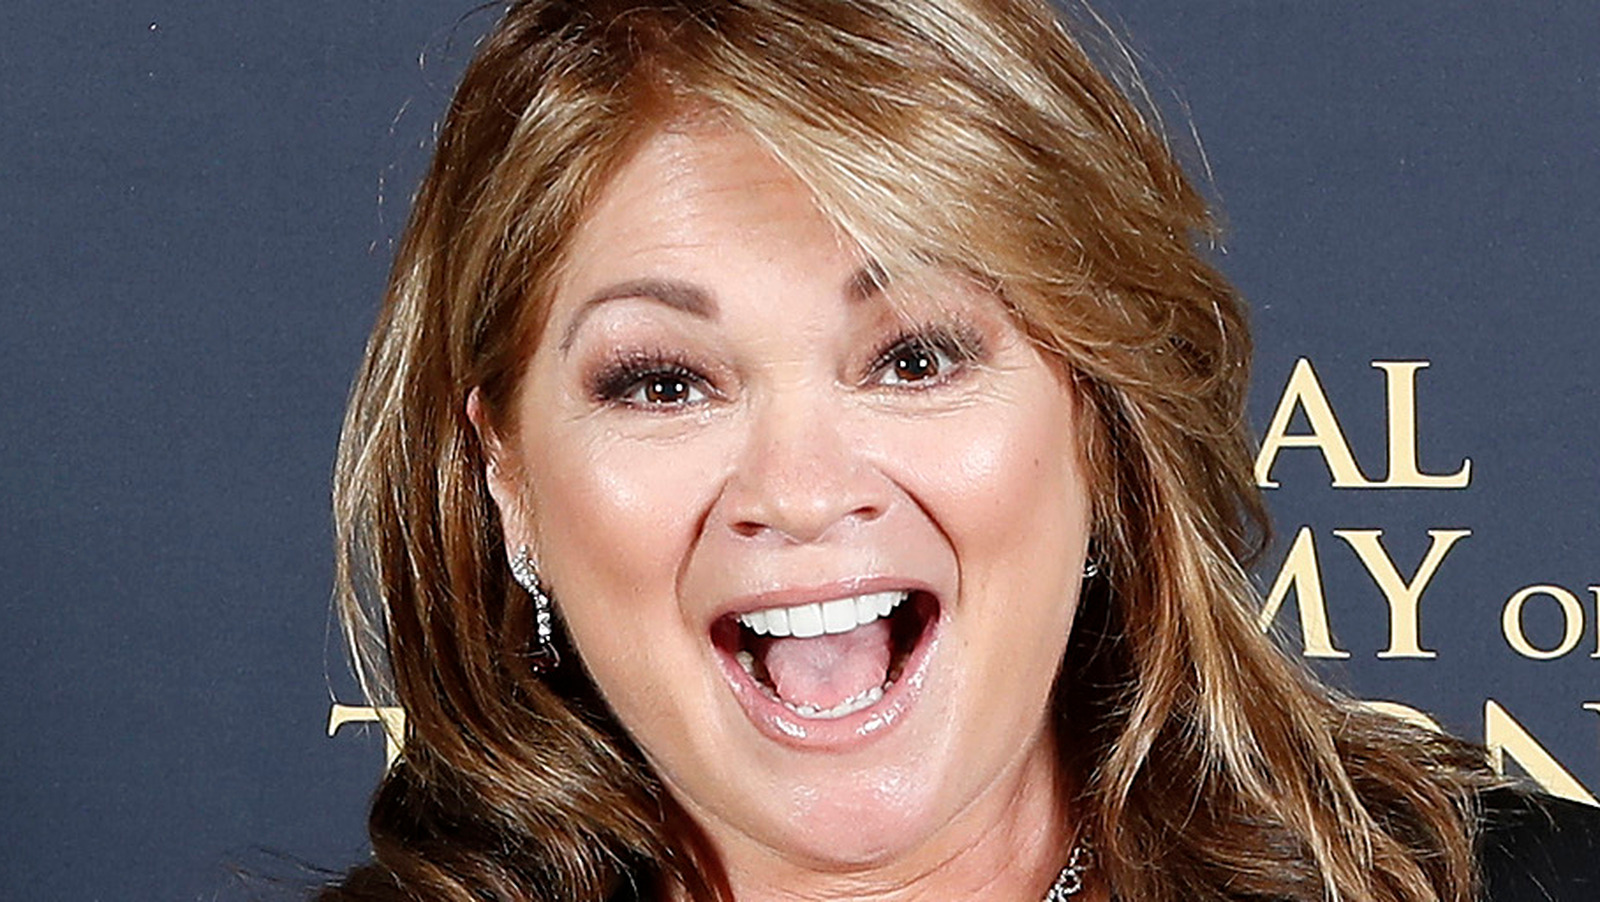 Valerie Bertinelli Just Clapped Back At A Twitter Troll In The Perfect Way - Mashed